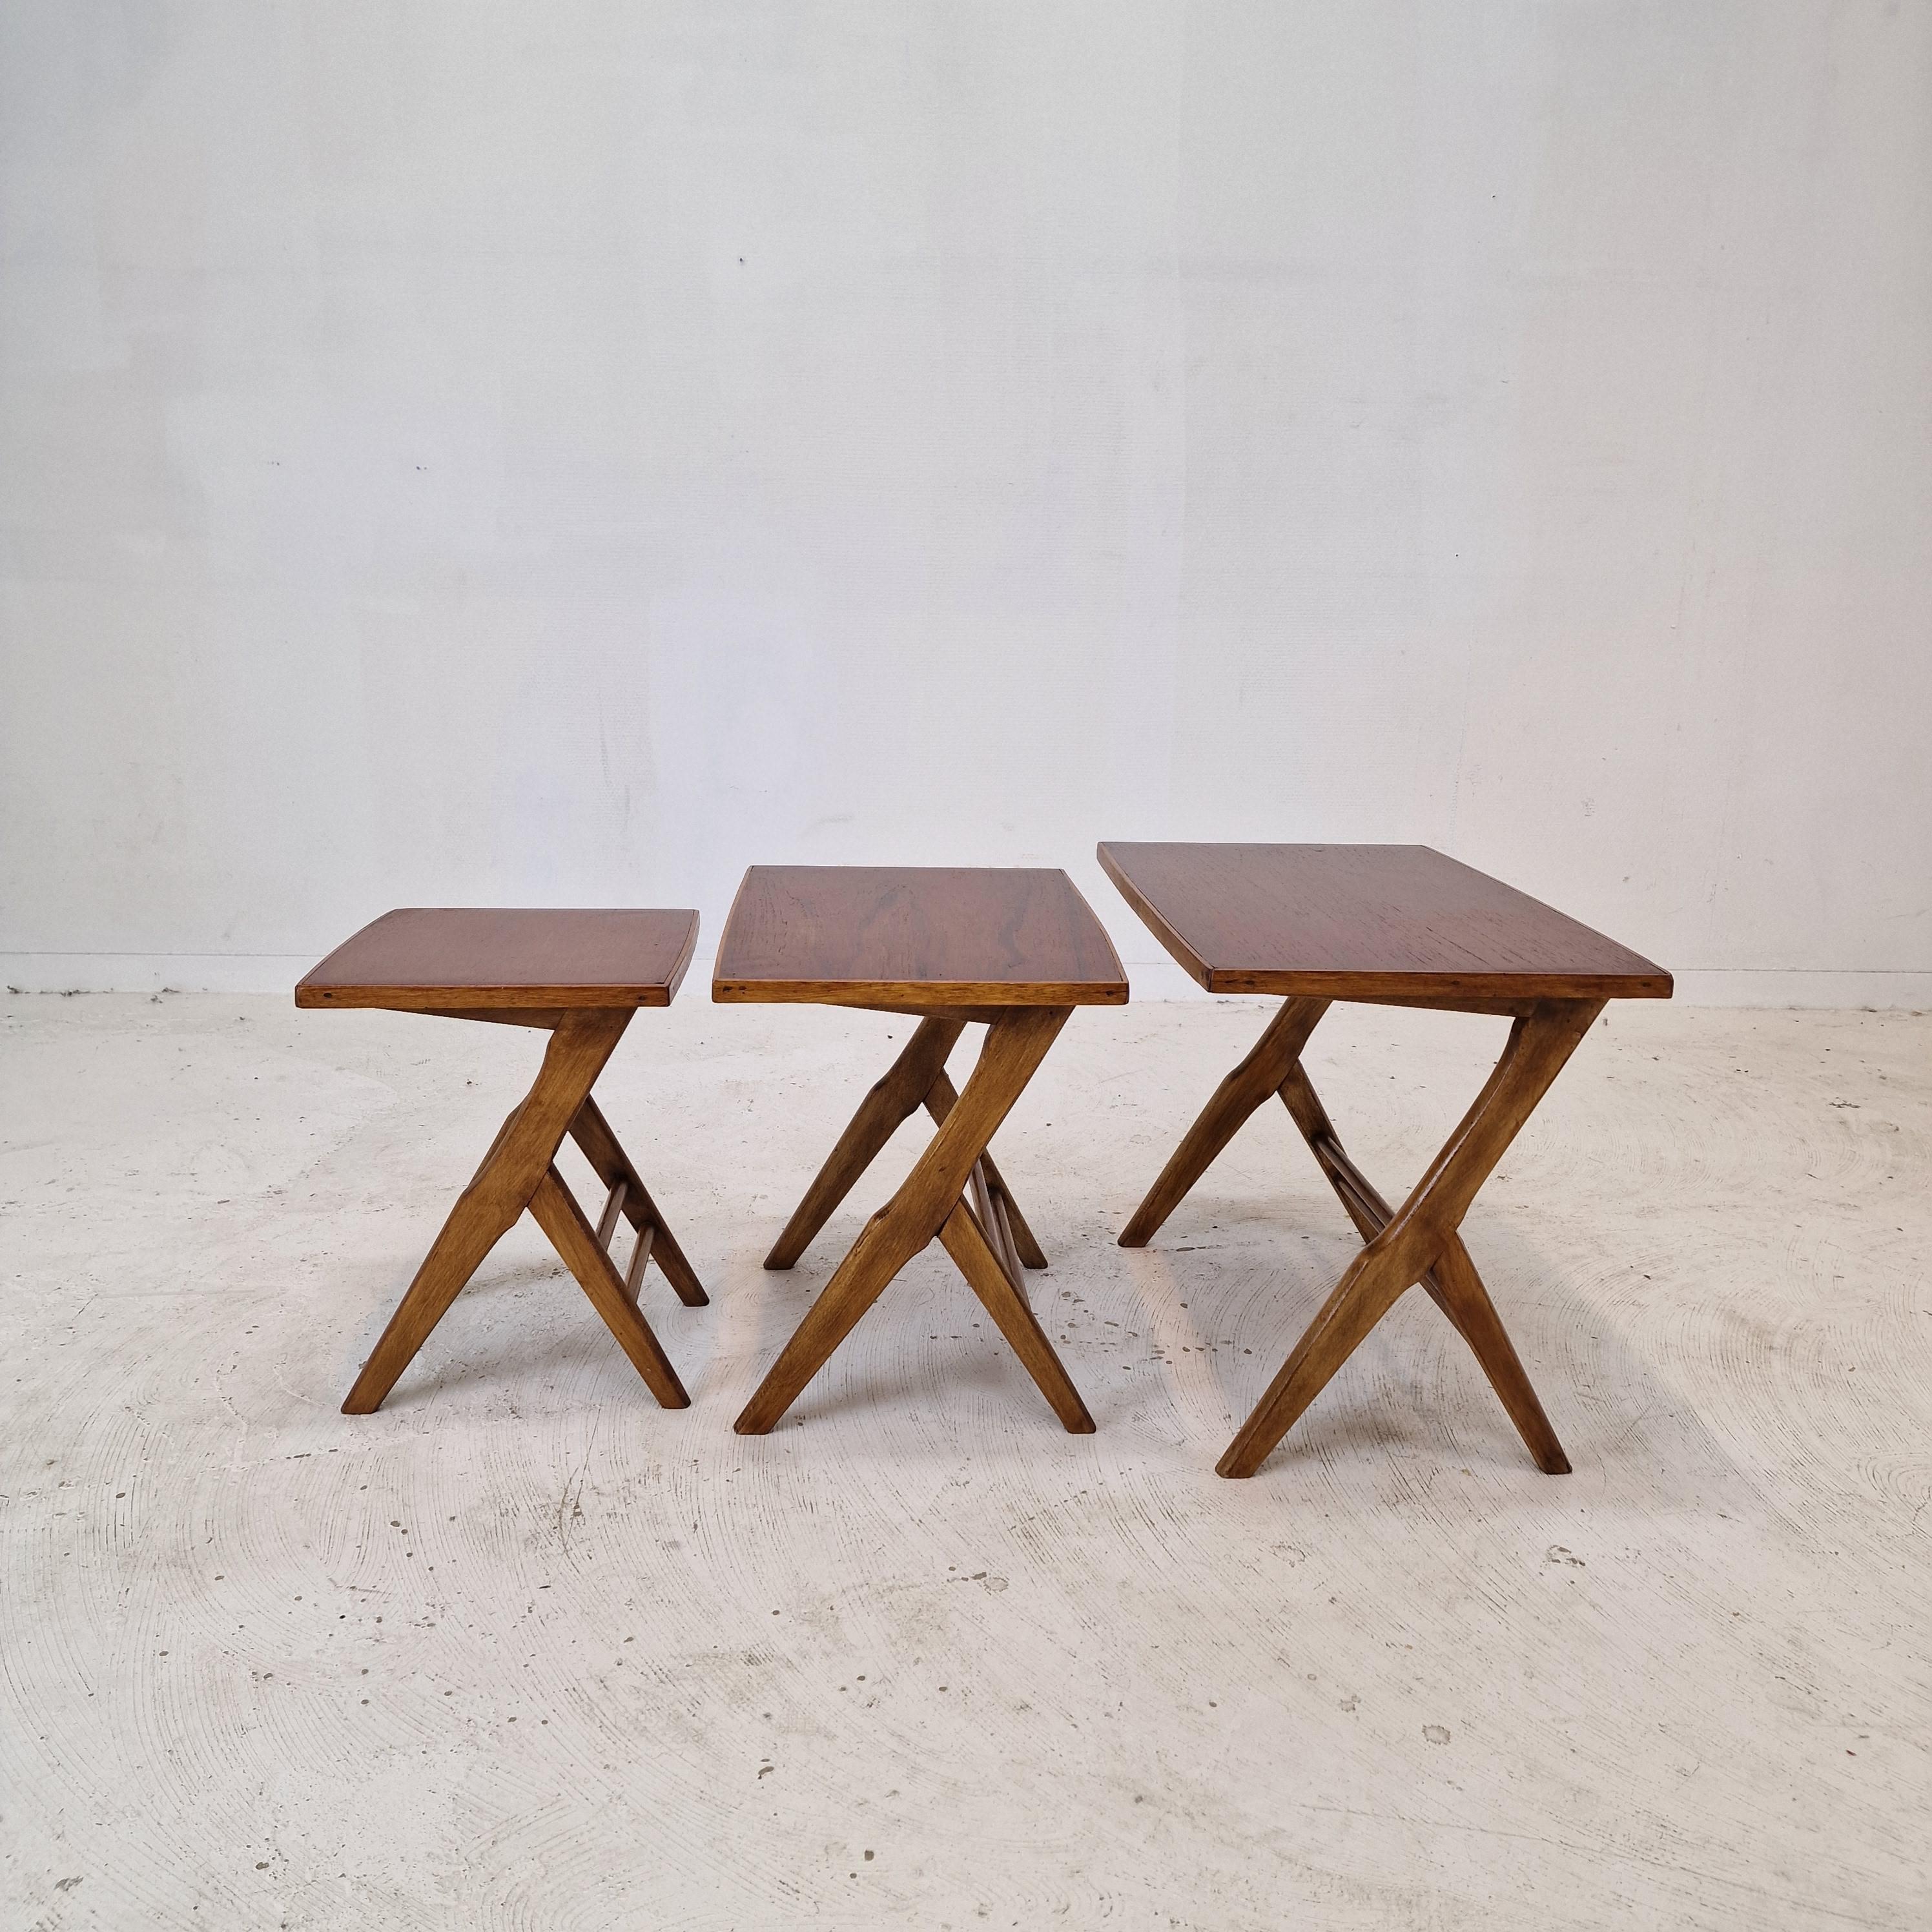 Very nice set of 3 Coffee or Nesting Tables, 1960's.
The tables have all a different size so they fit in each other.

This lovely set is handcrafted out of wood.
Please take notice of the very nice patterns. 

The tables have normal traces of use,